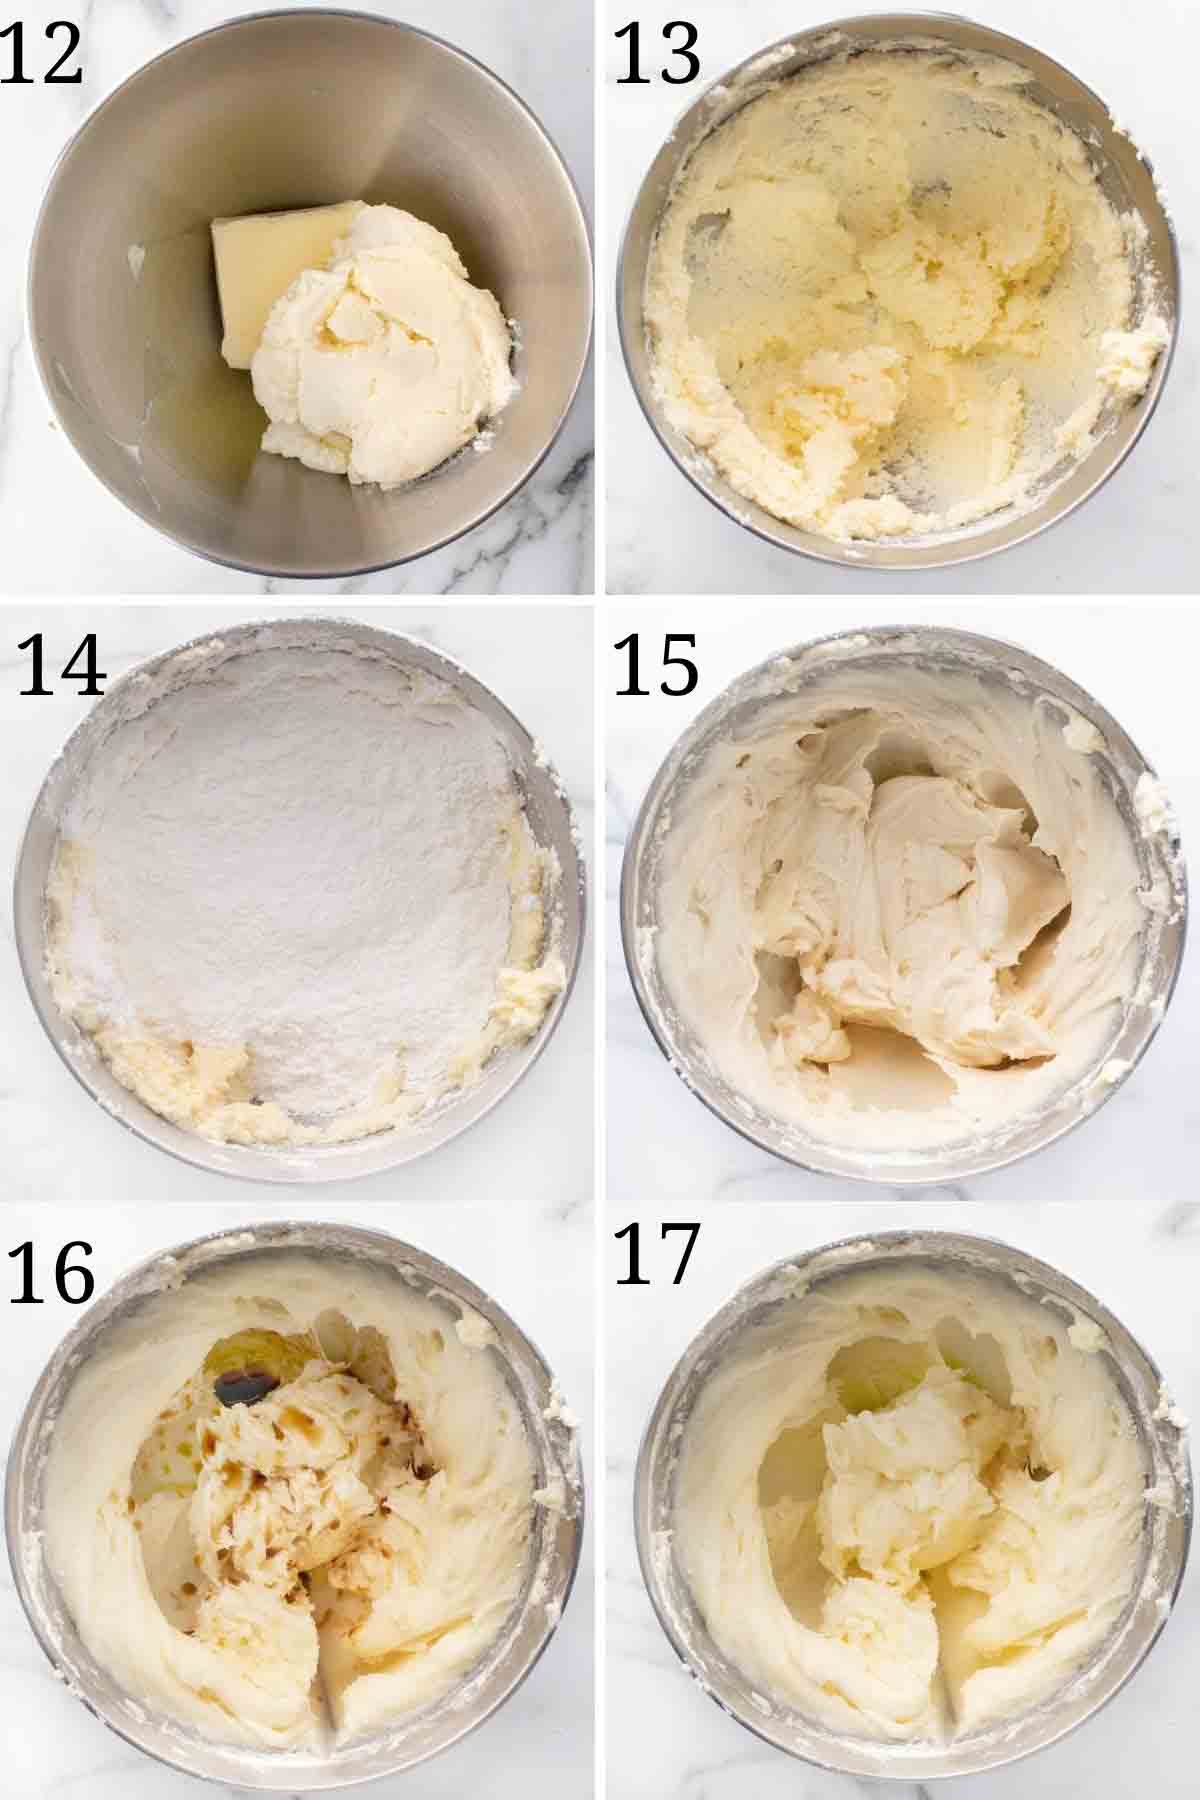 6 images showing how to make mascarpone frosting